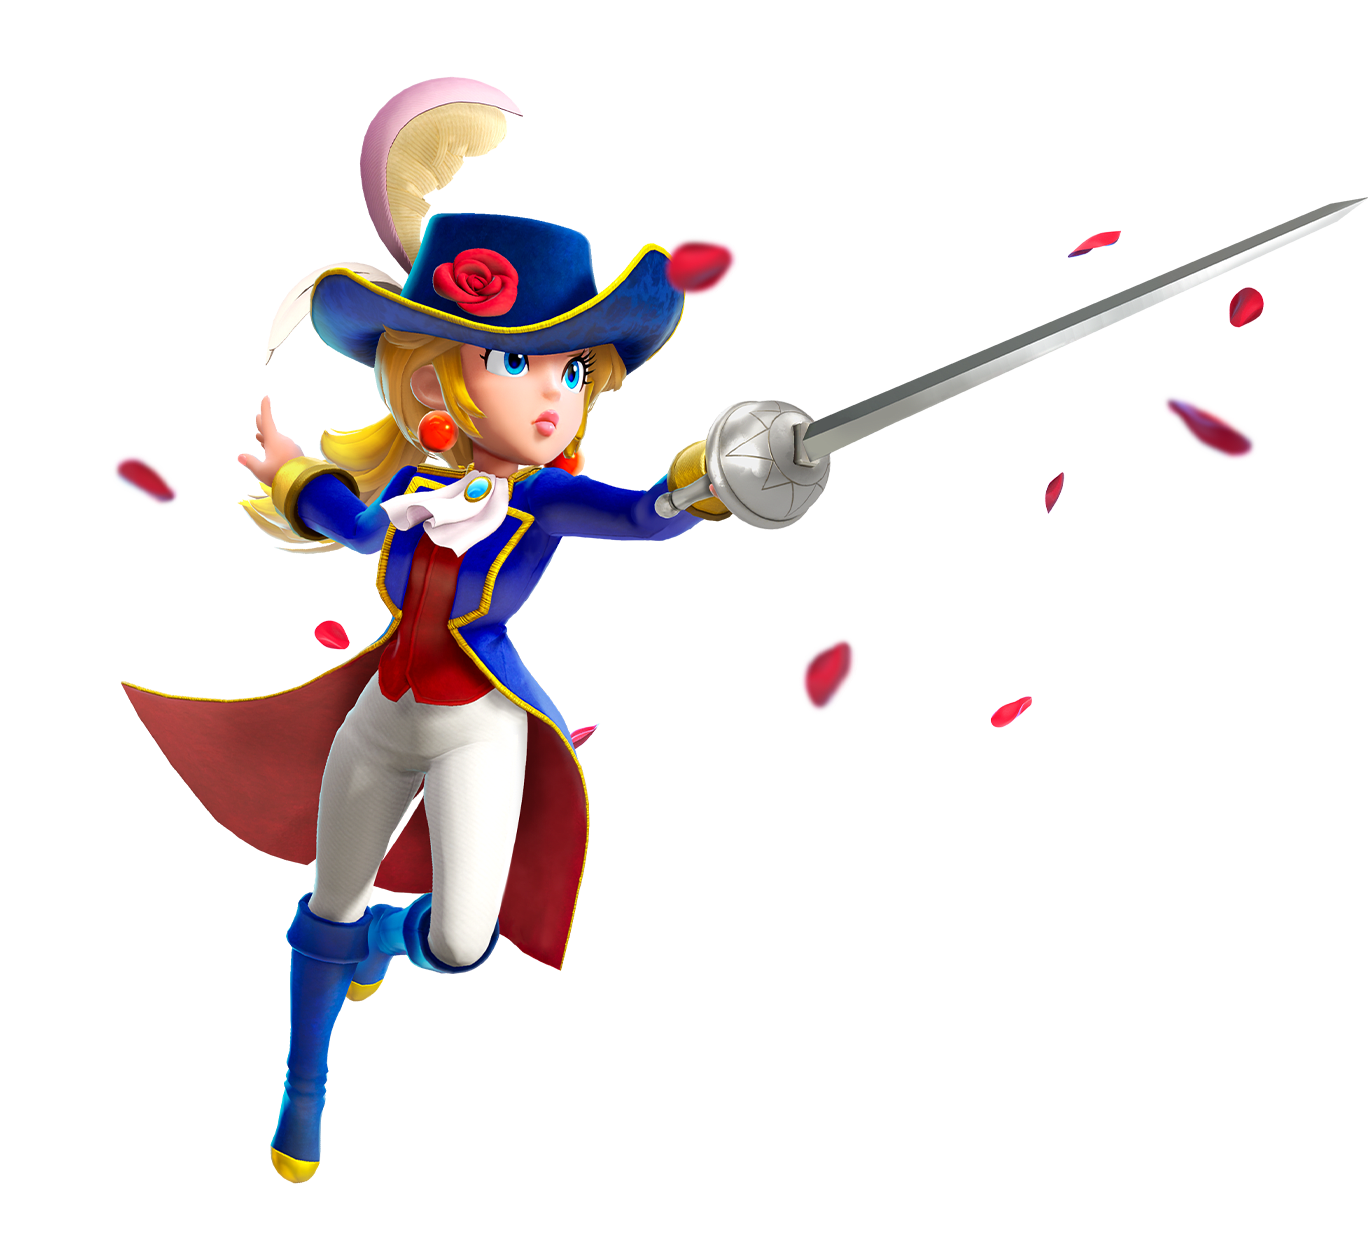 Rose petals flurry around Peach, who dons a stylish blue coat and a cavalier hat with a poofy feather. She lunges forward with her sword.